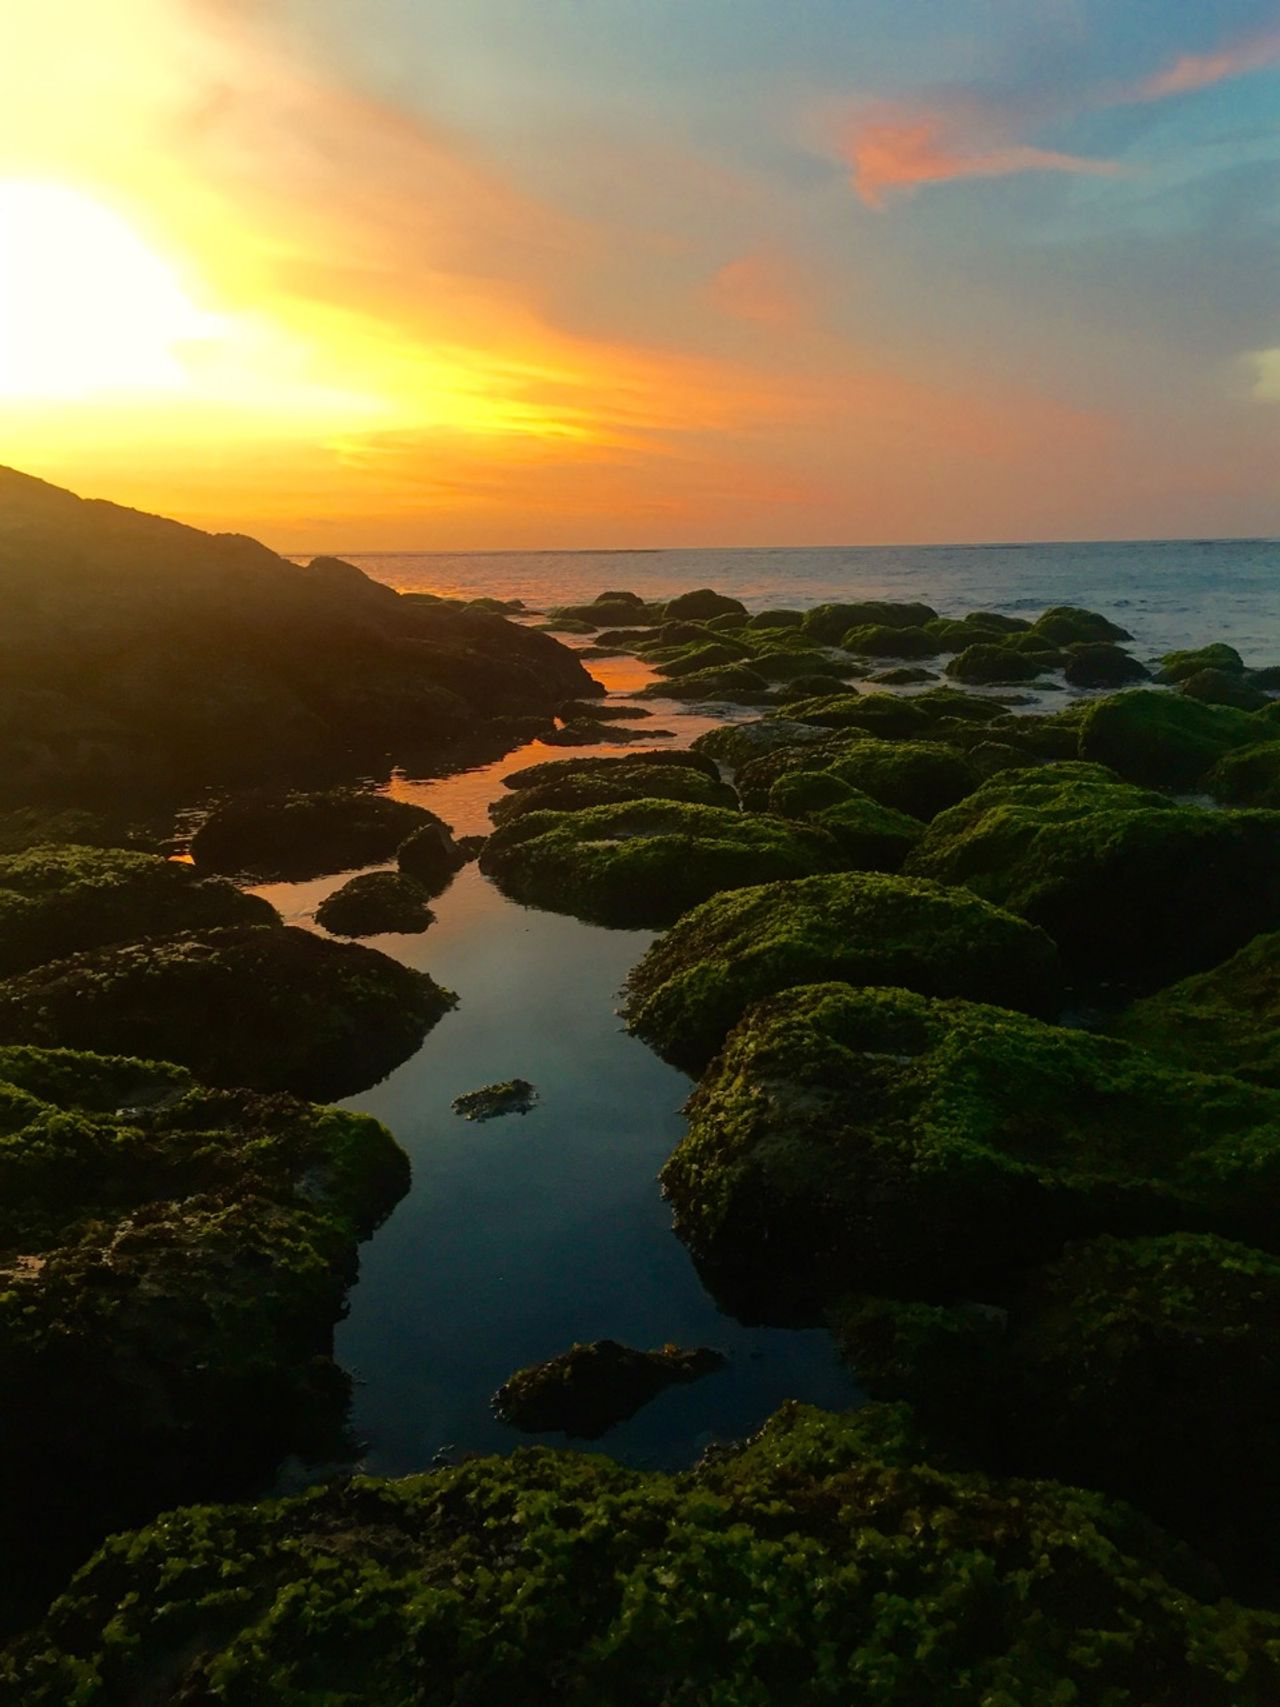 Moss-covered rocks at sunset. Sky reflected in water.